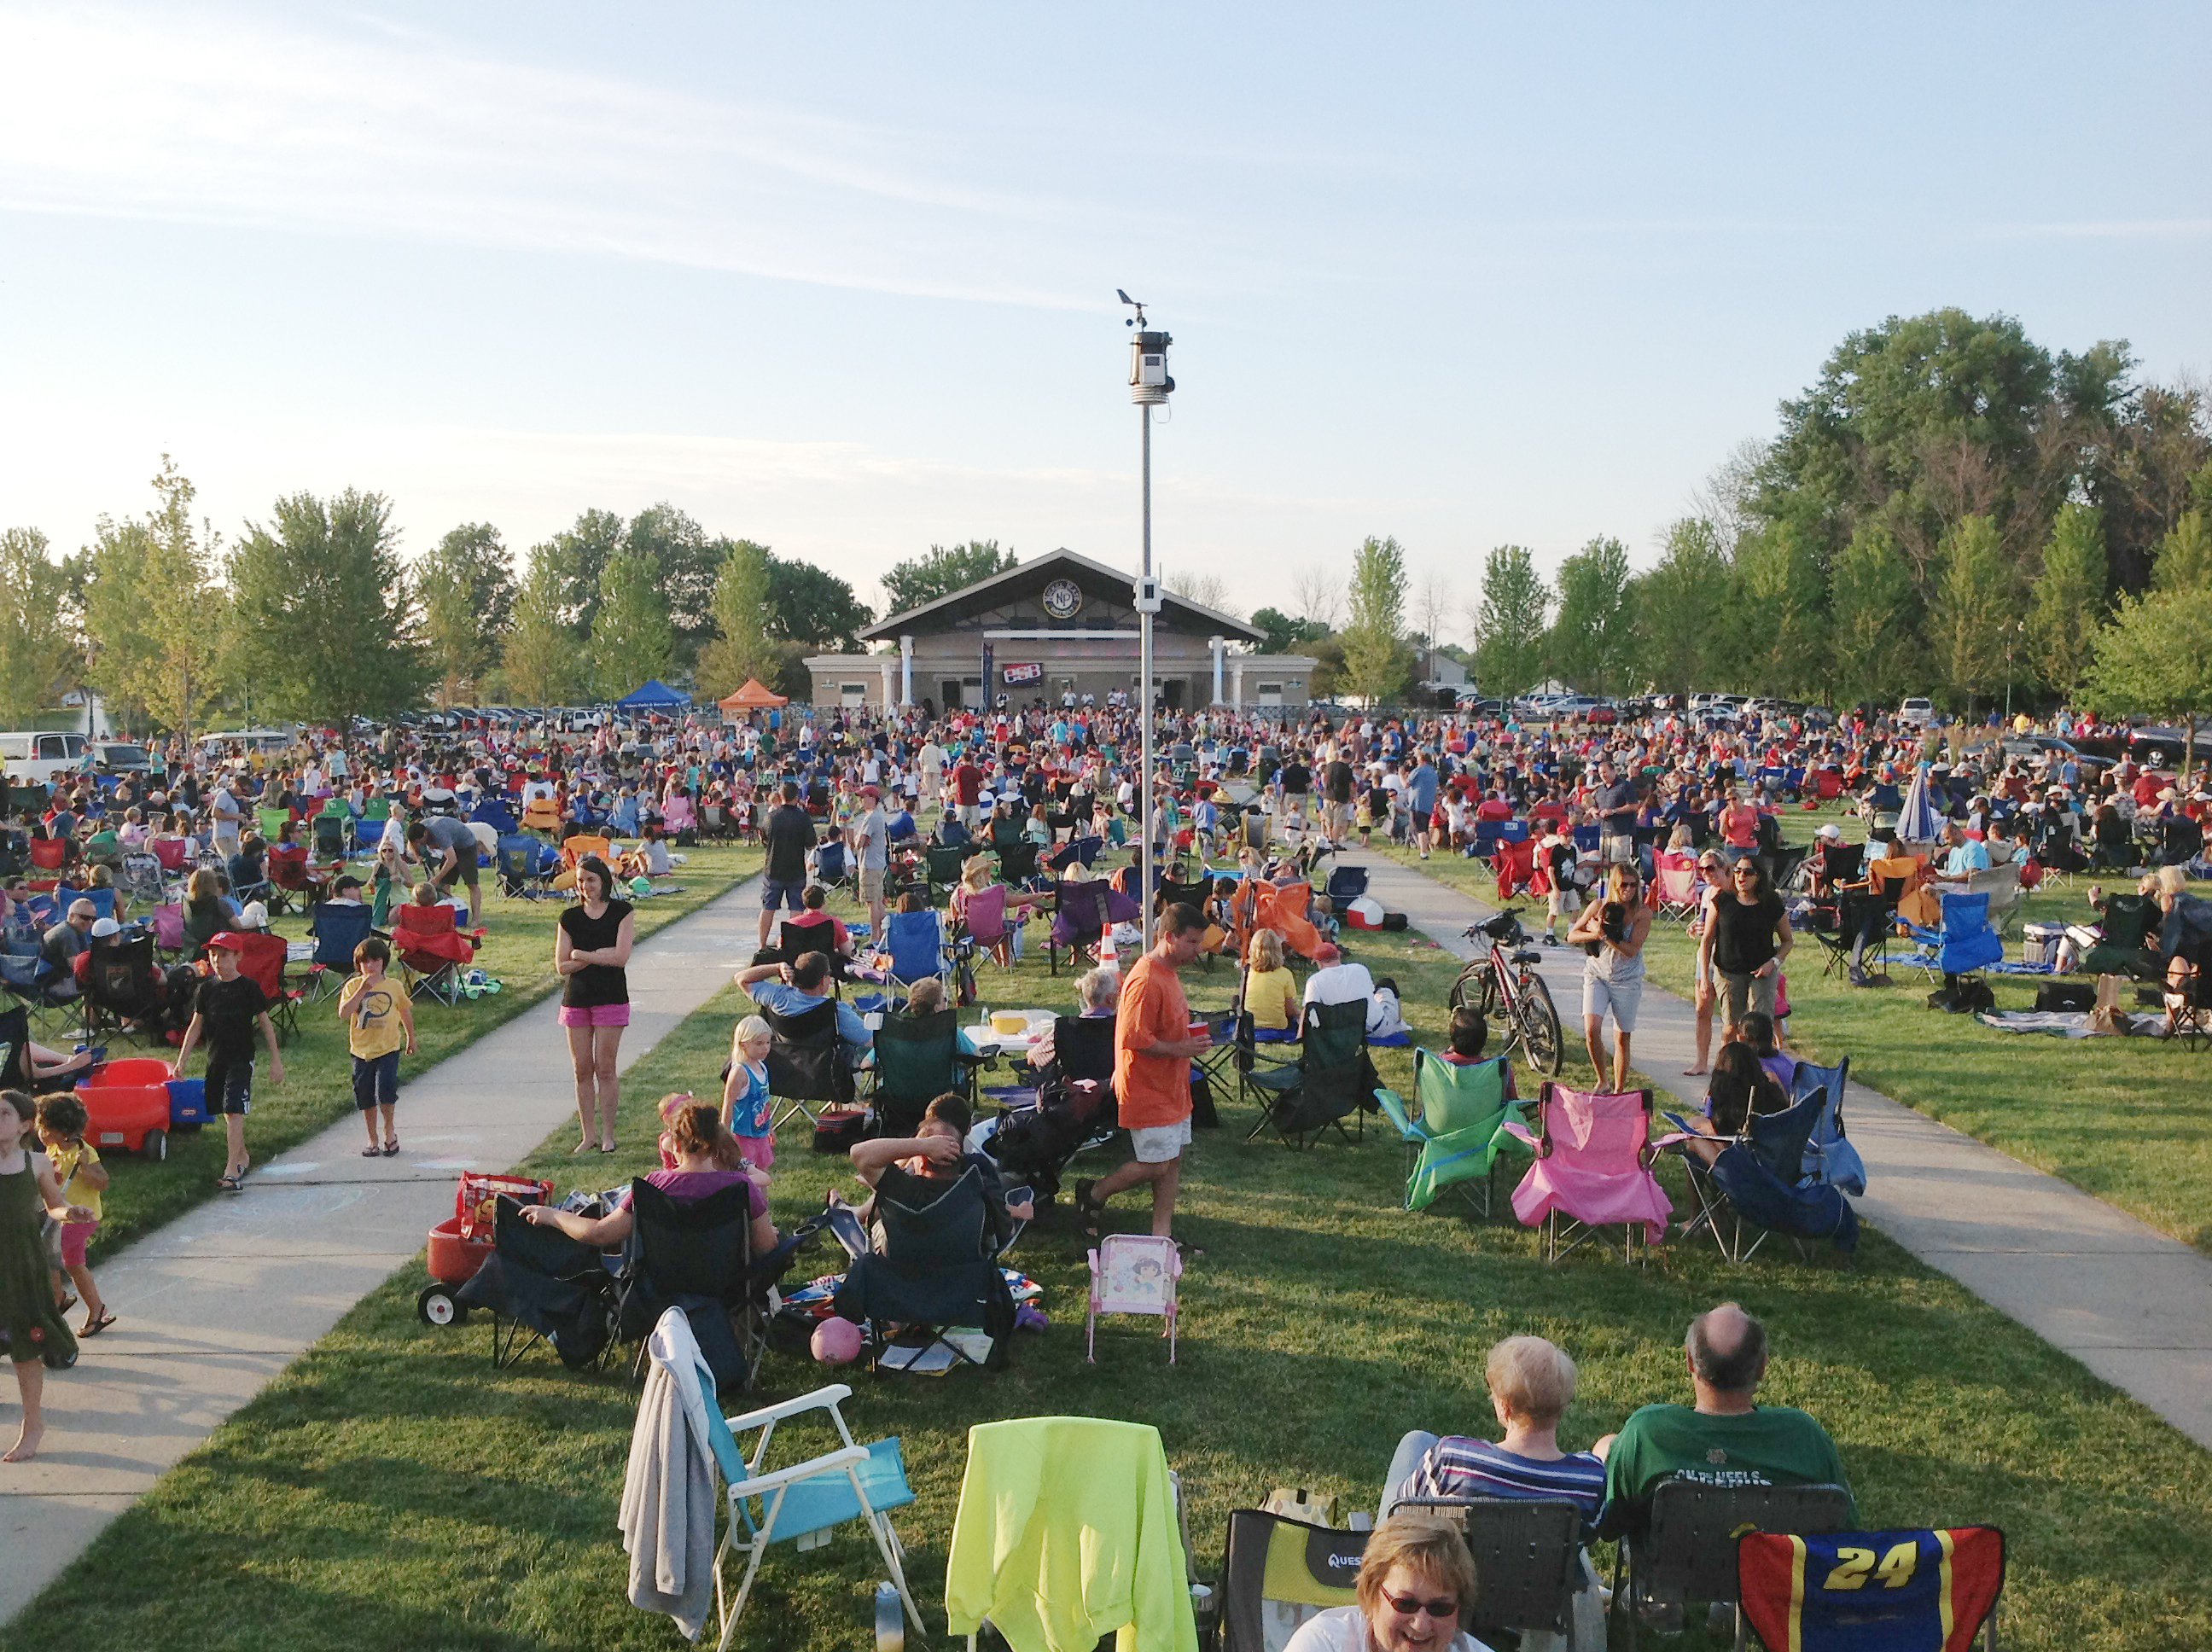 Fishers’ public summer concert series is expected to draw thousands of people to the Nickel Plate District for each show. (Submitted photo)